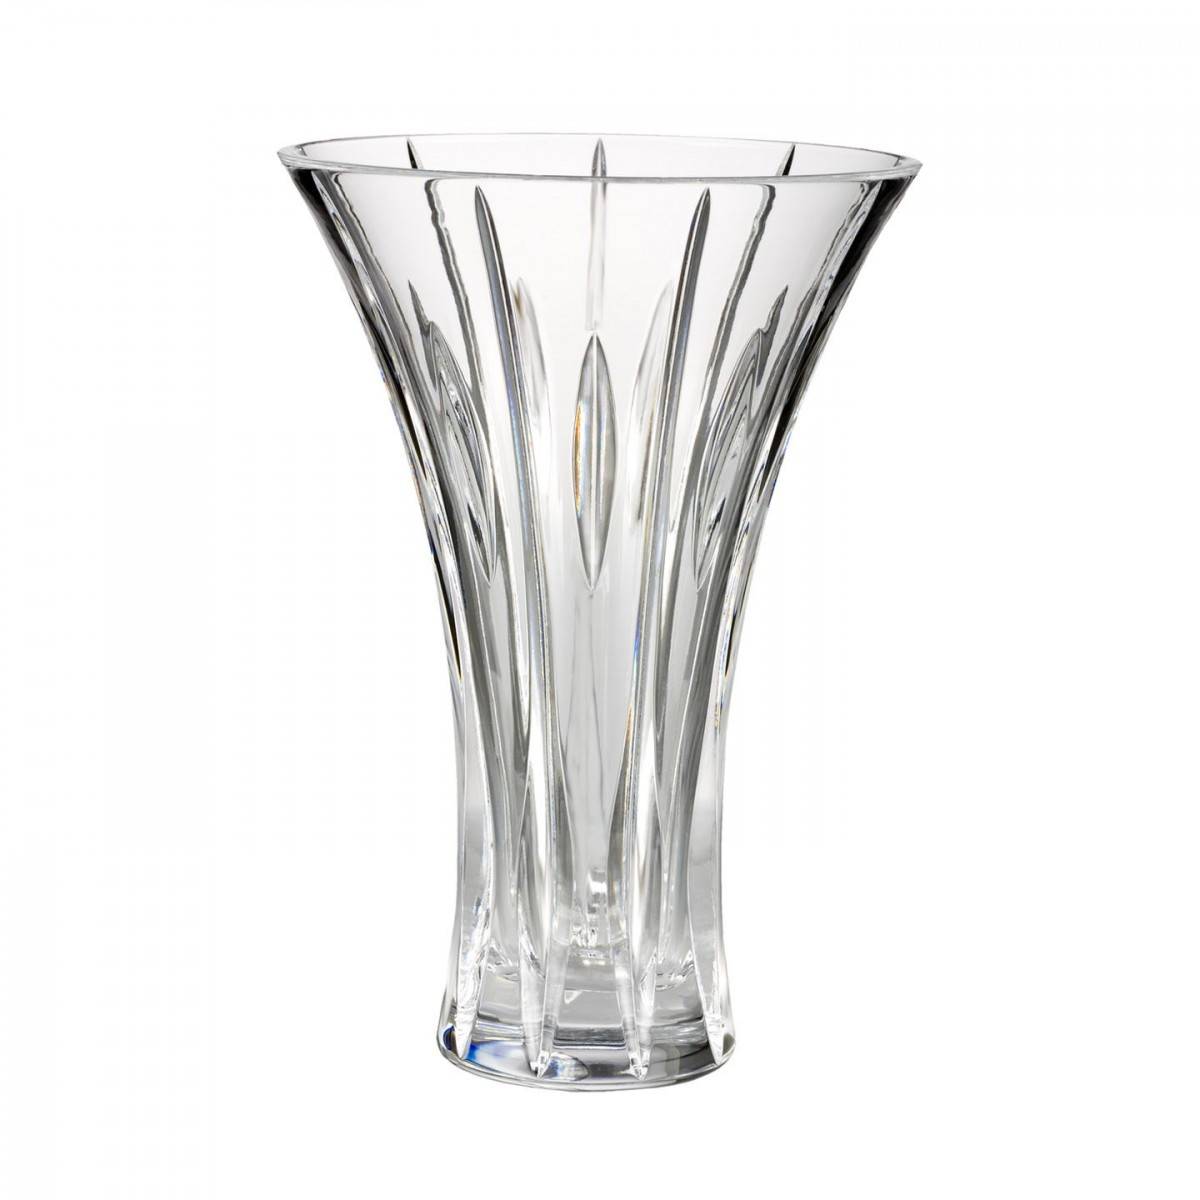 28 Perfect Waterford Giftology Lismore Sugar Bud Vase 2024 free download waterford giftology lismore sugar bud vase of waterford sheridan flared vase 23cm waterforda crystal within sheridan flared vase 23cm